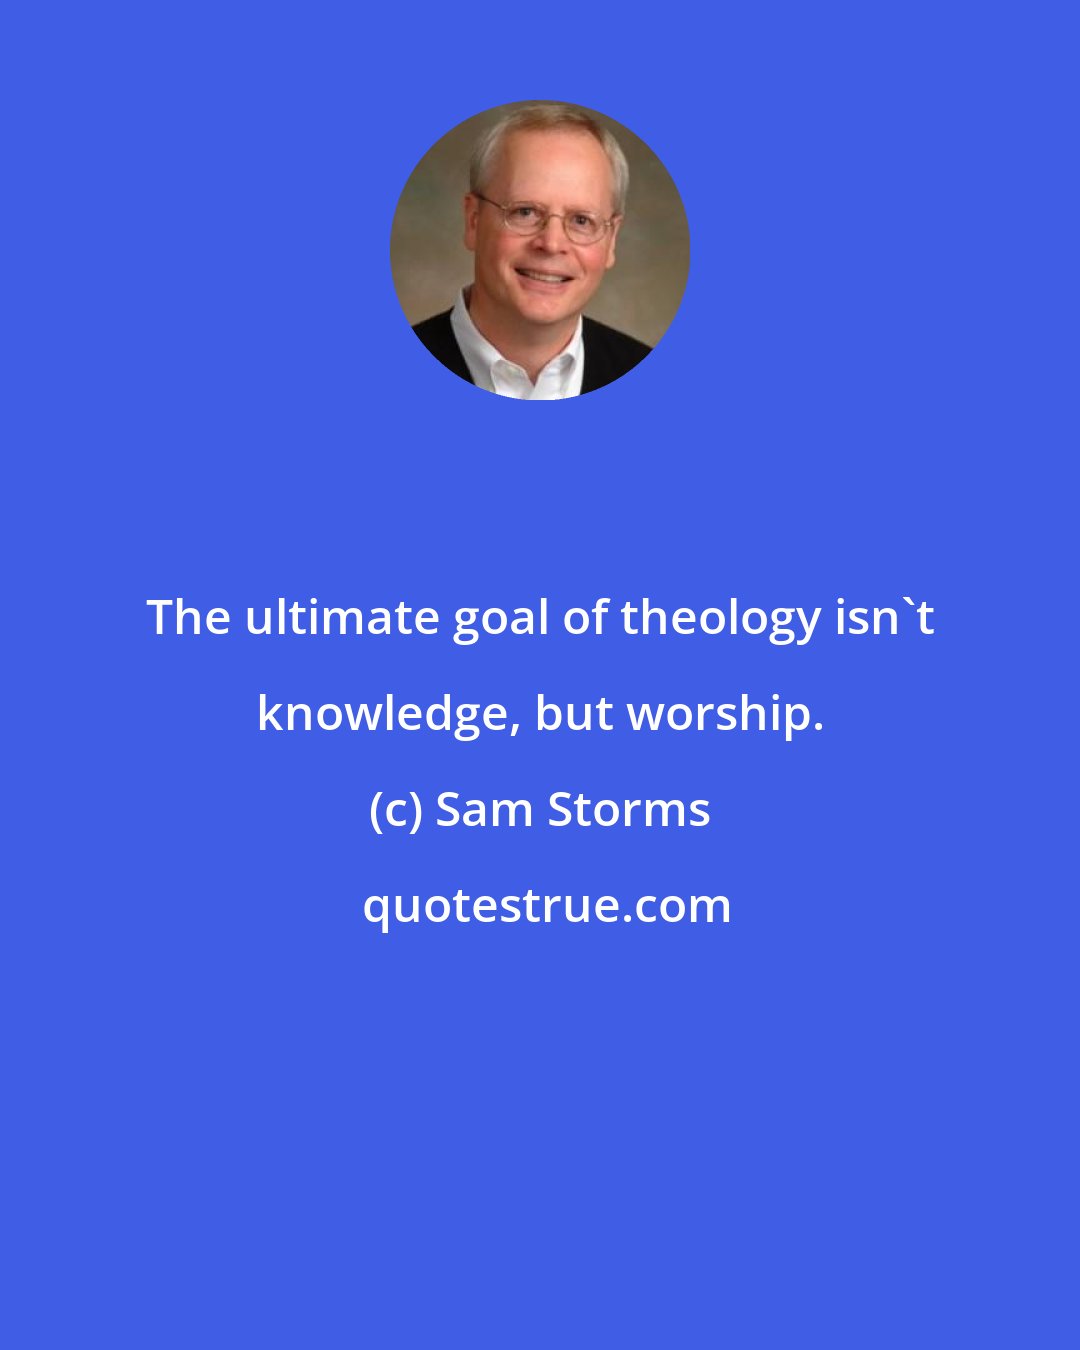 Sam Storms: The ultimate goal of theology isn't knowledge, but worship.